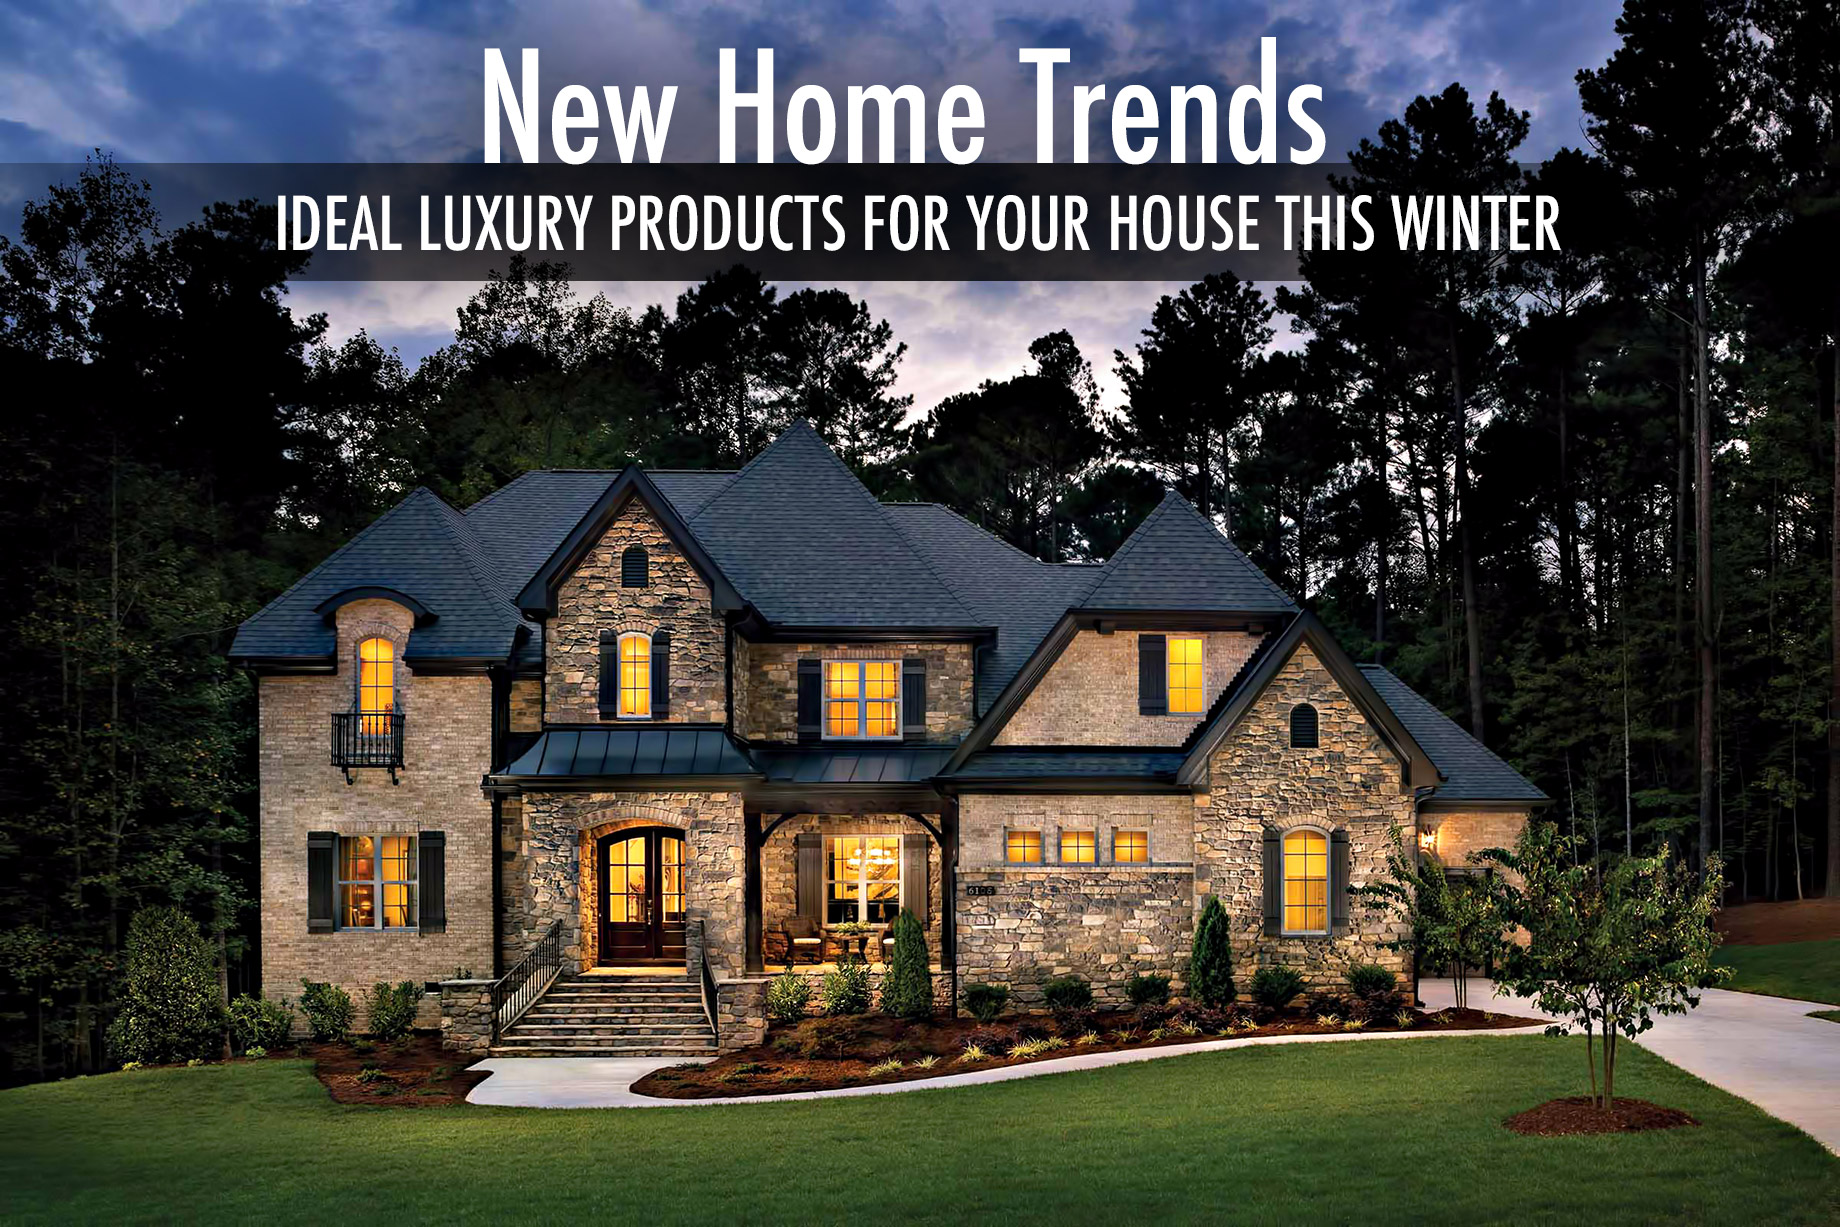 New Home Trends - Ideal Luxury Products For Your House This Winter